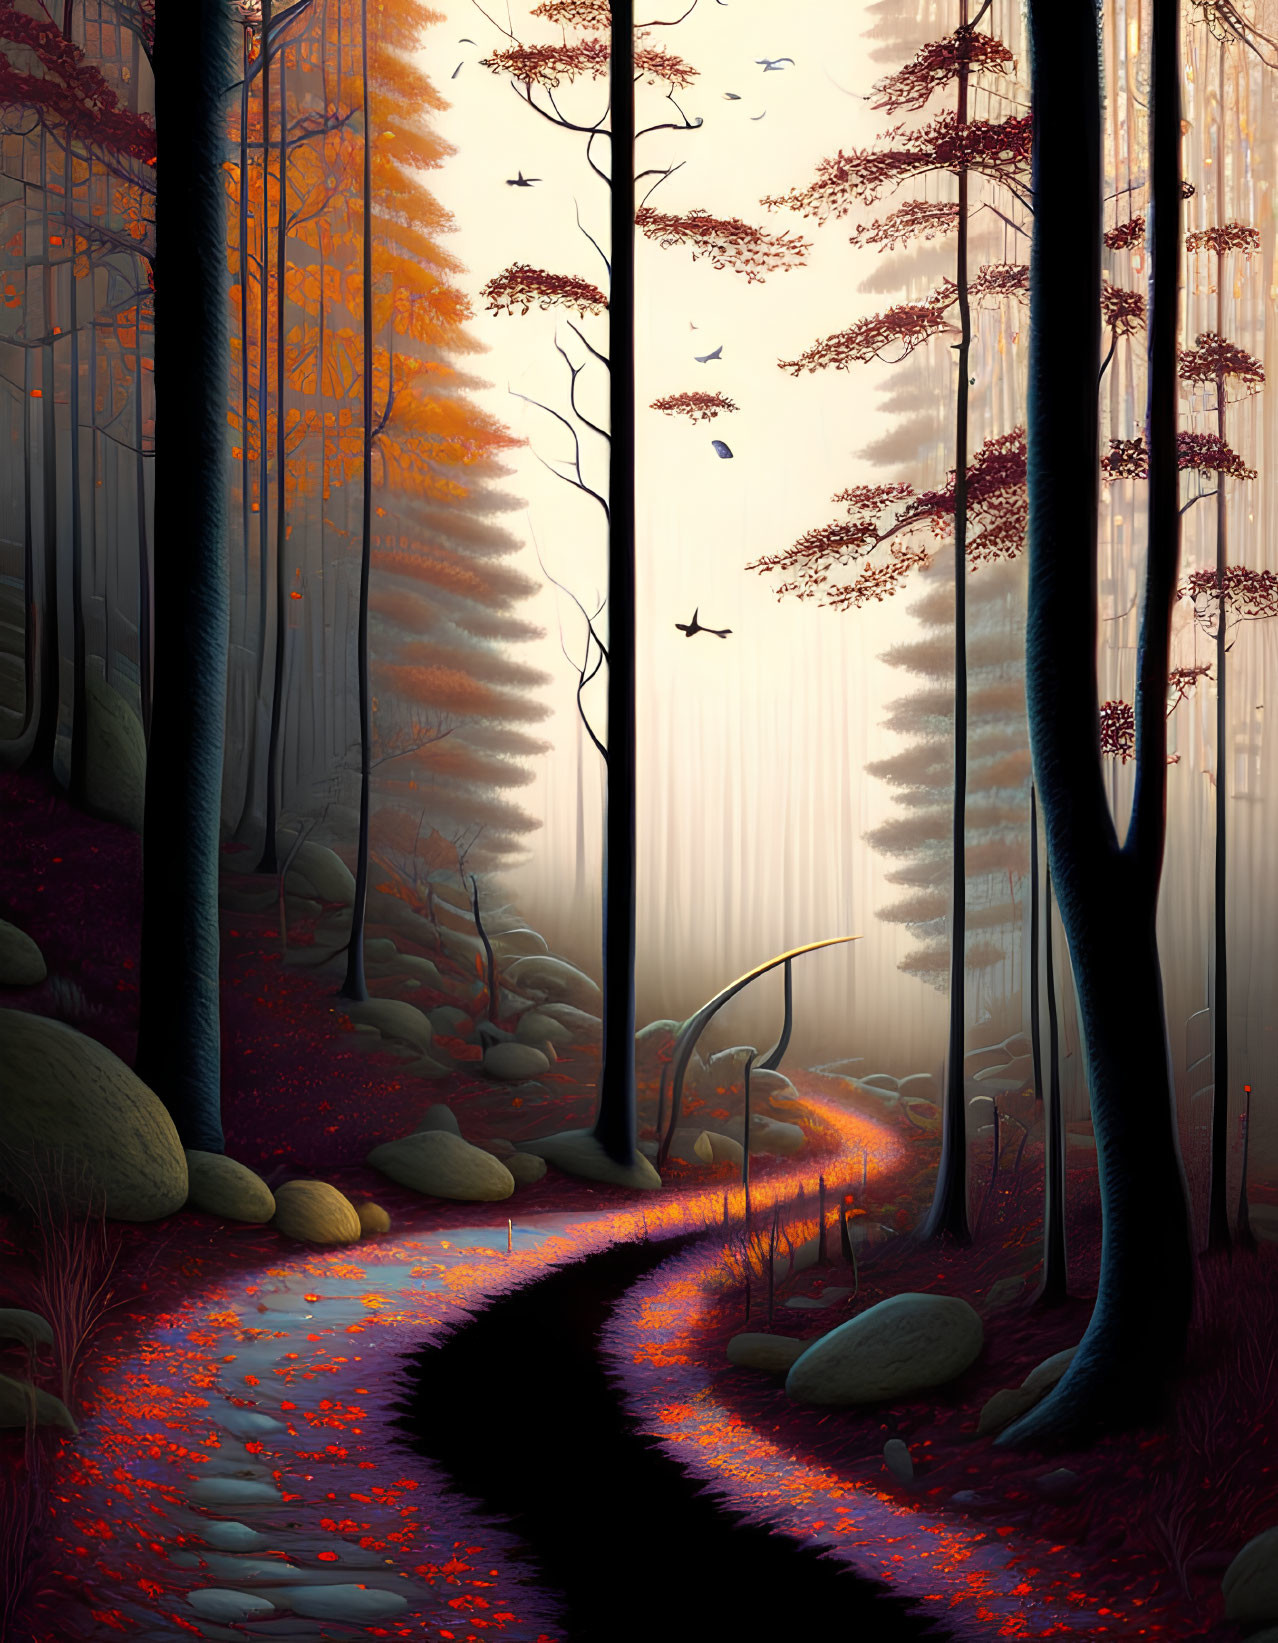 Autumnal forest path with stream, sunlight, red leaves, and flying birds.